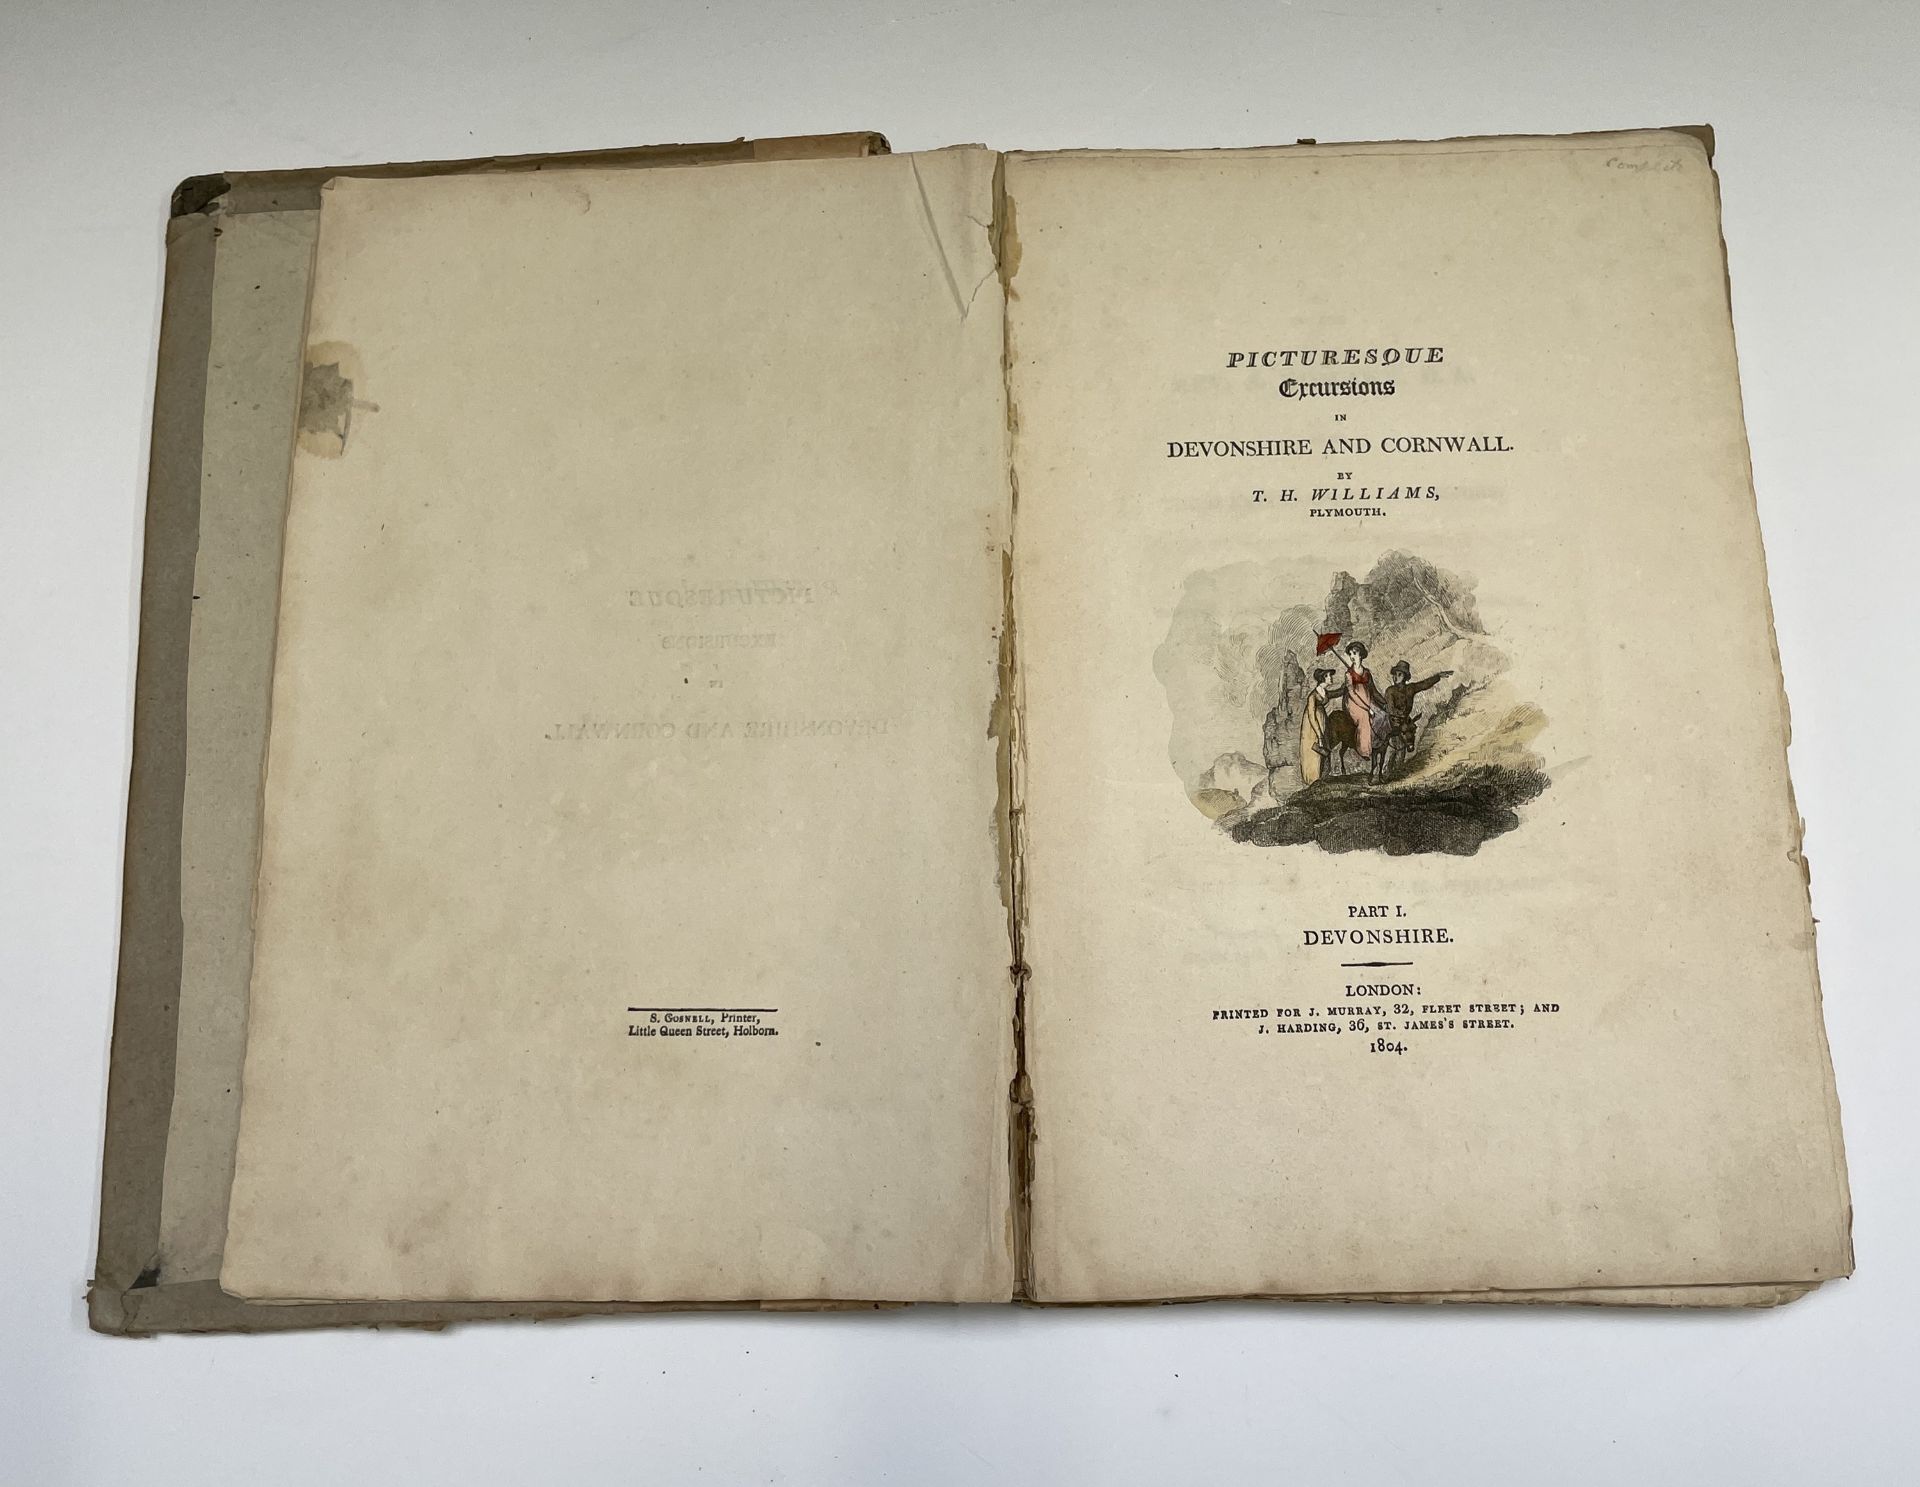 T. H. WILLIAMS. 'Picturesque Excursions in Devonshire and Cornwall.' First edition,engraved title - Image 2 of 16